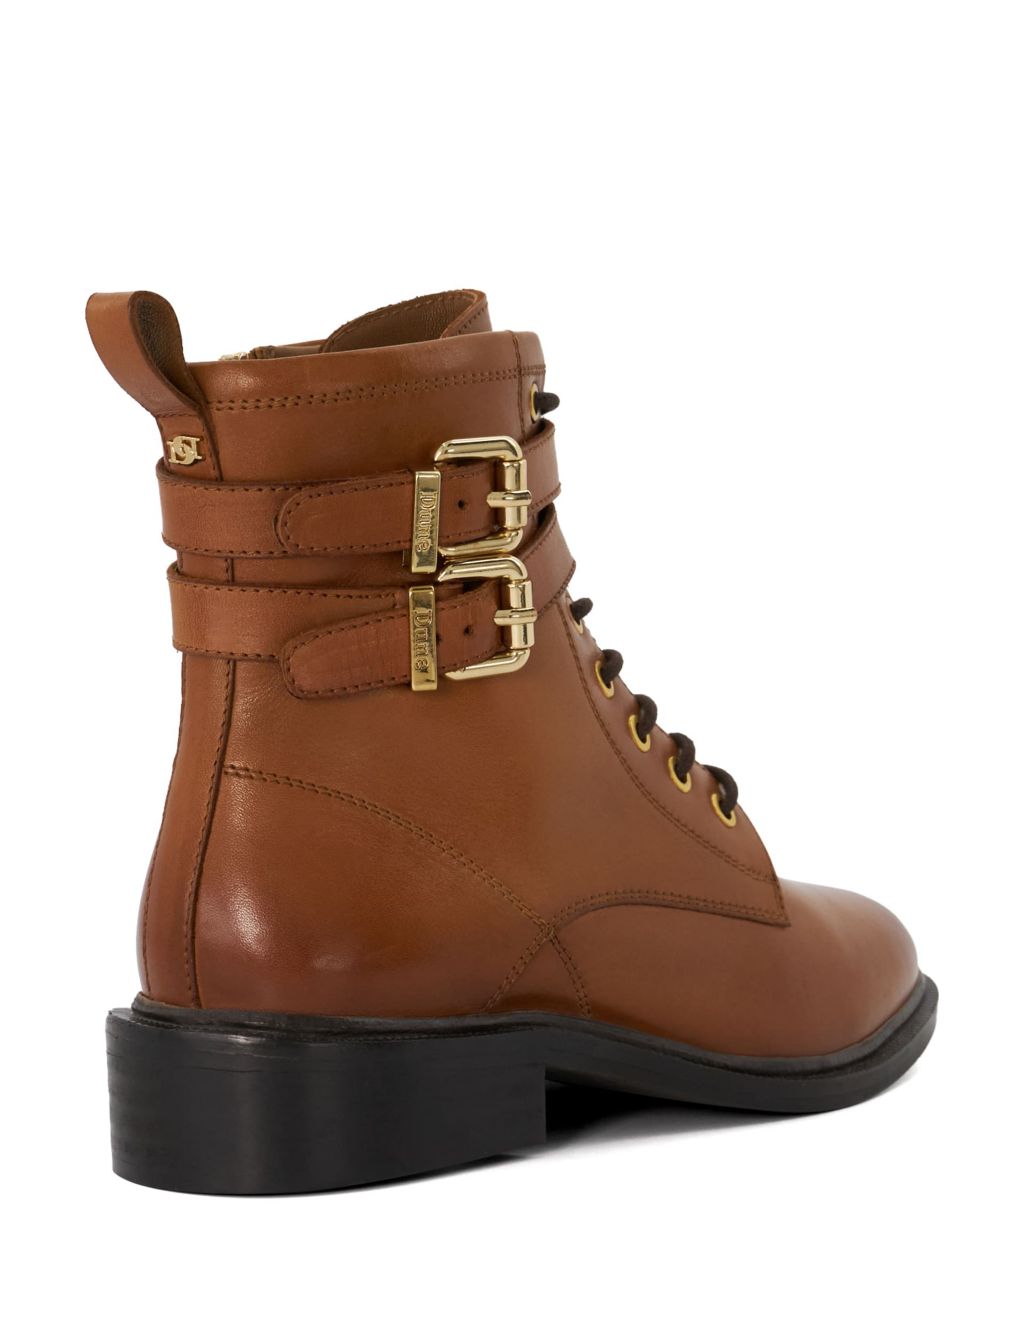 Leather Lace Up Buckle Flat Ankle Boots image 3